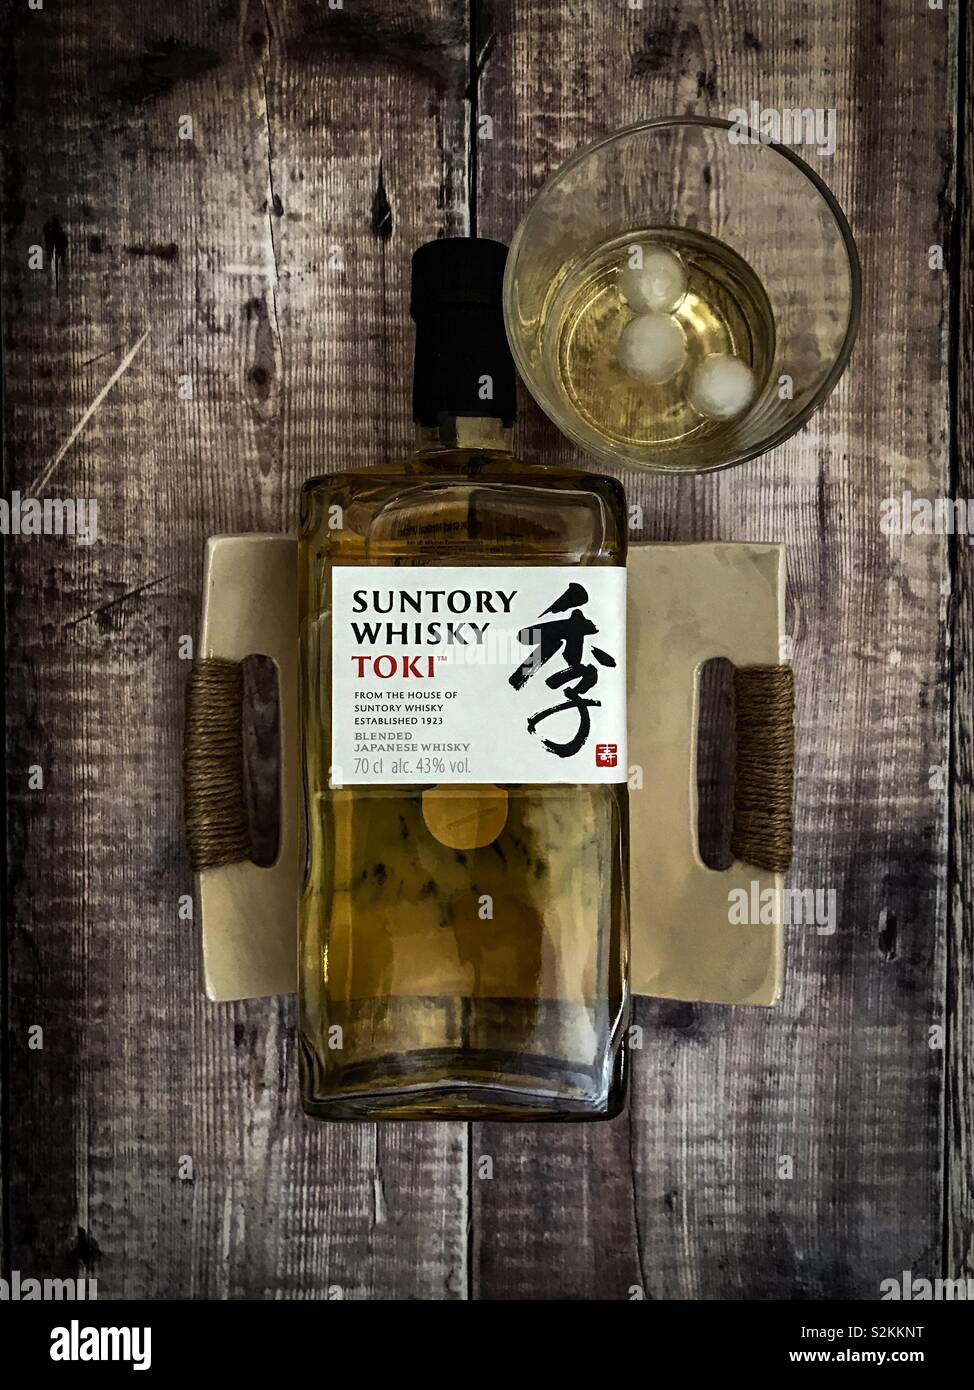 A Japanese whisky called Suntory Whisky Toki. A sweet whisky with fruity notes. Stock Photo